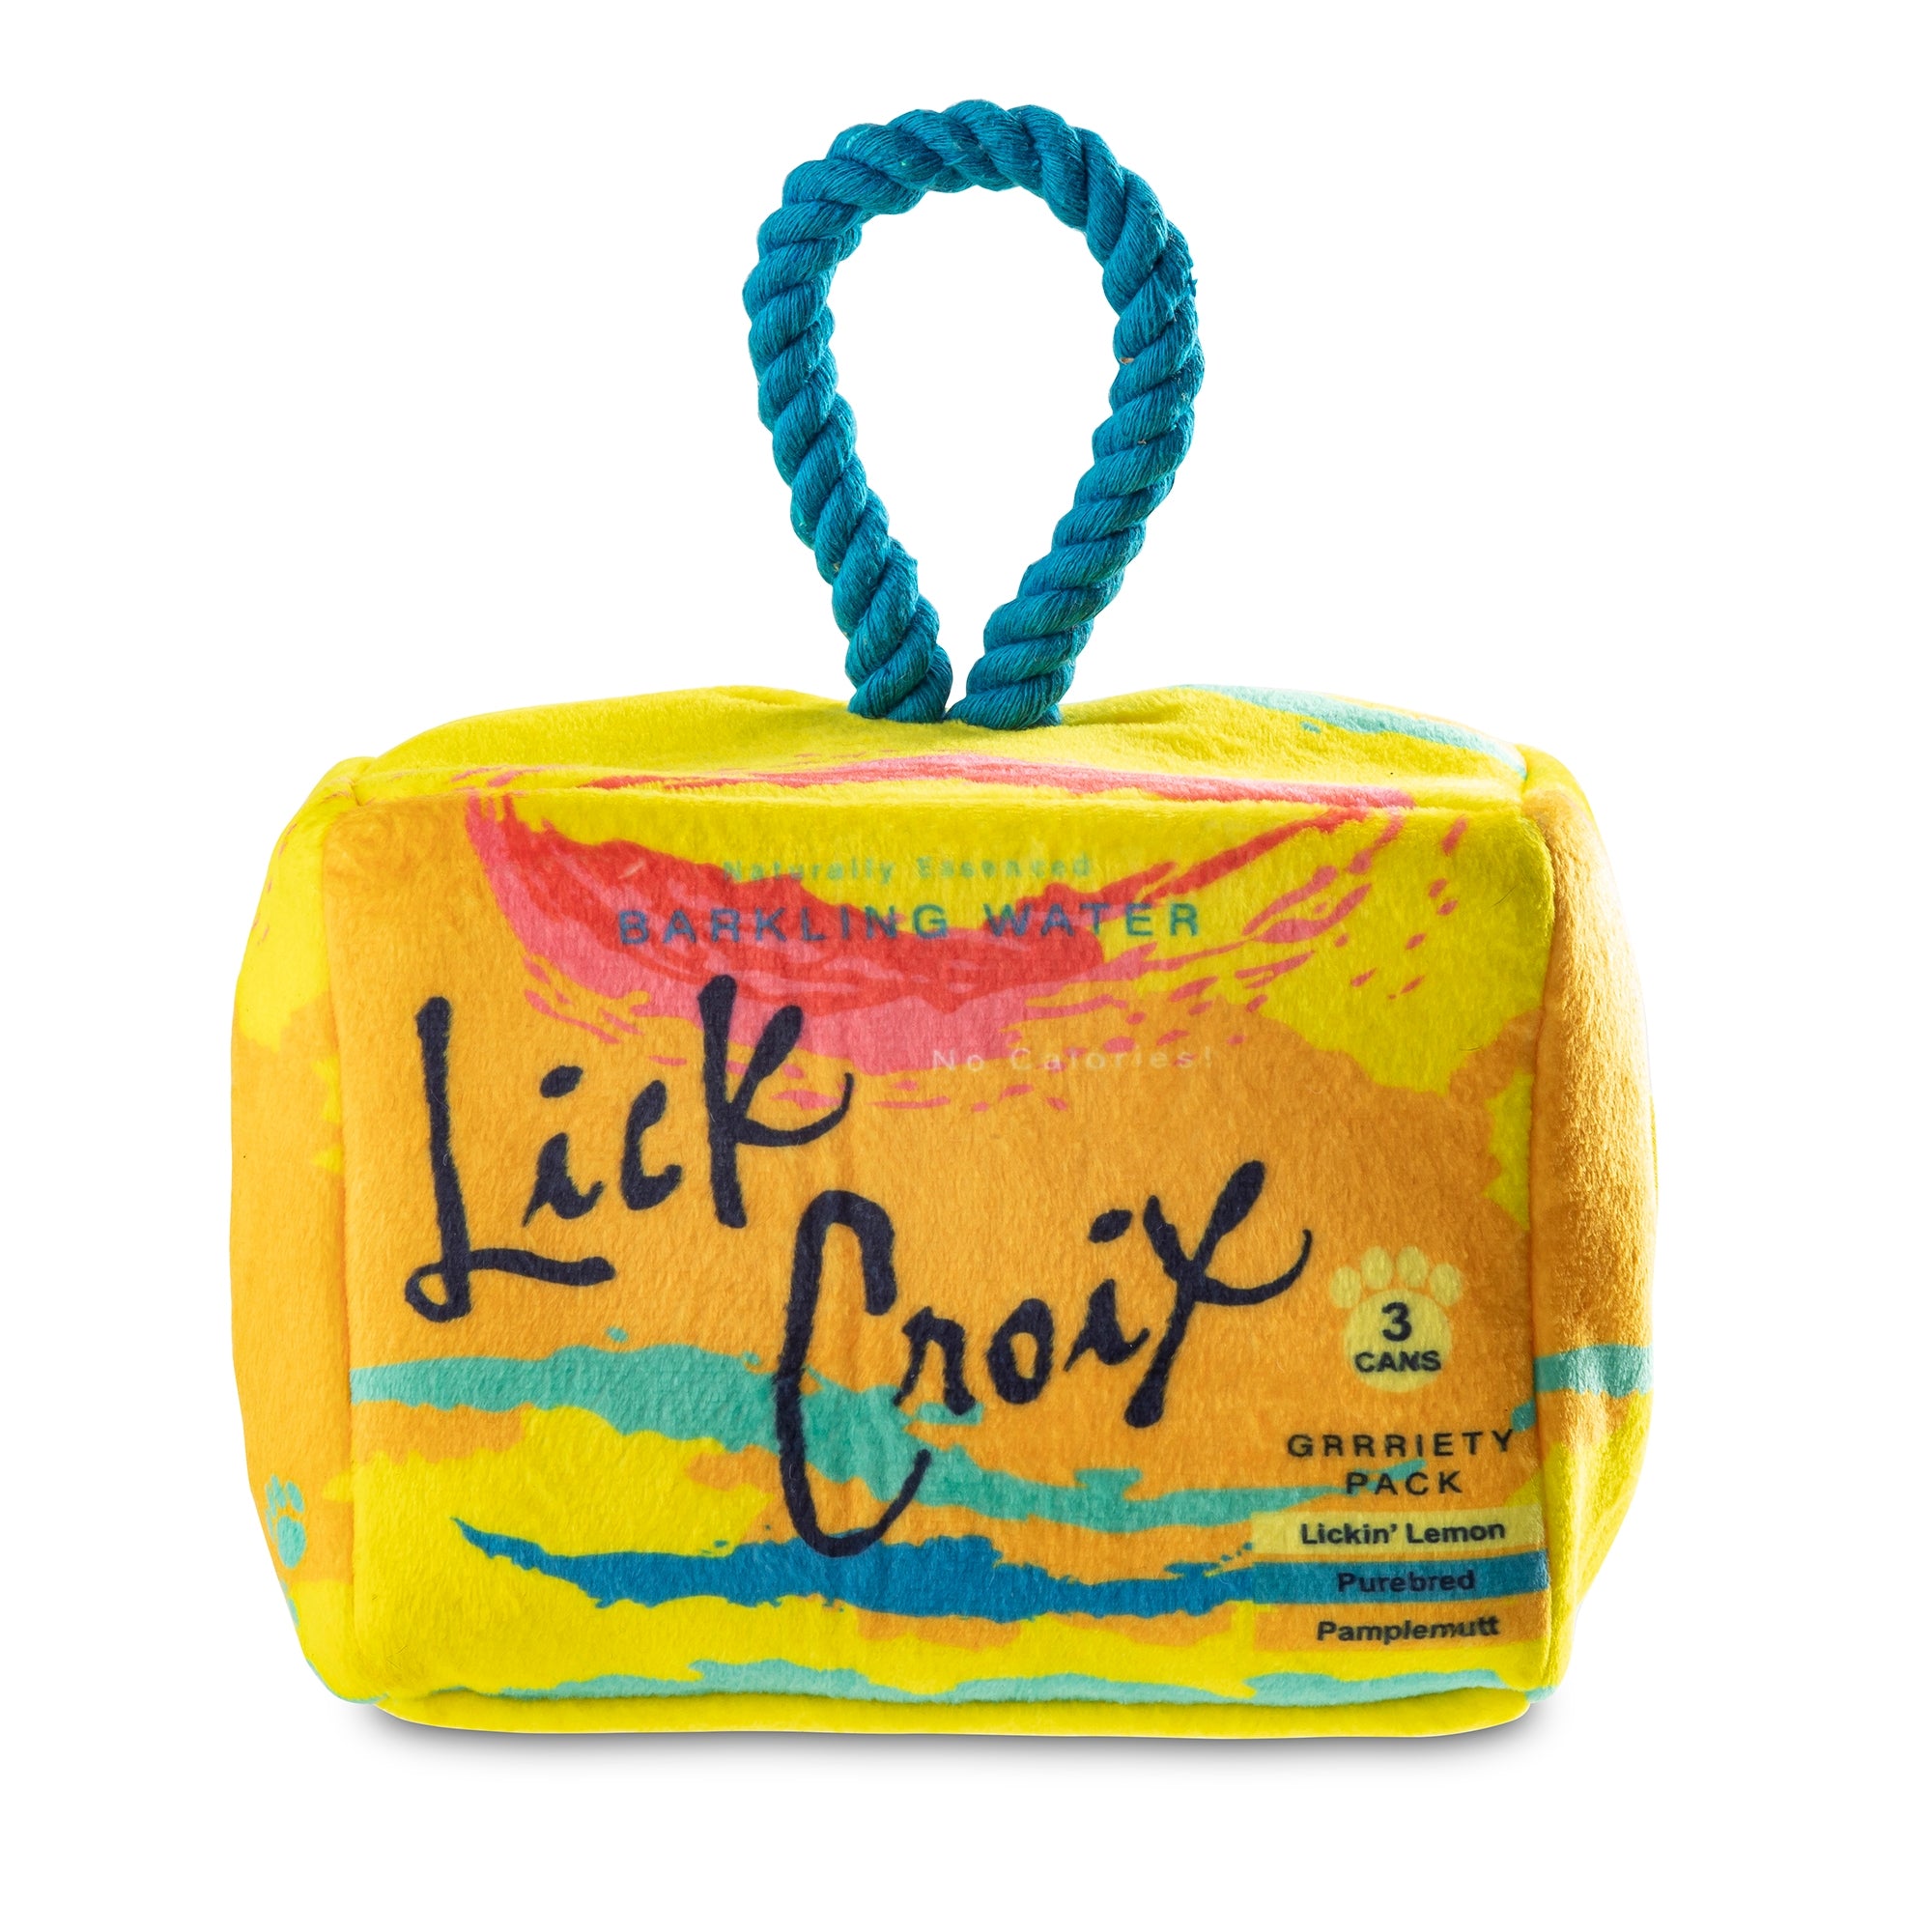 Pet Boutique - Dog Toy - LickCroix Grrriety Interactive Toy by Haute Diggity Dog